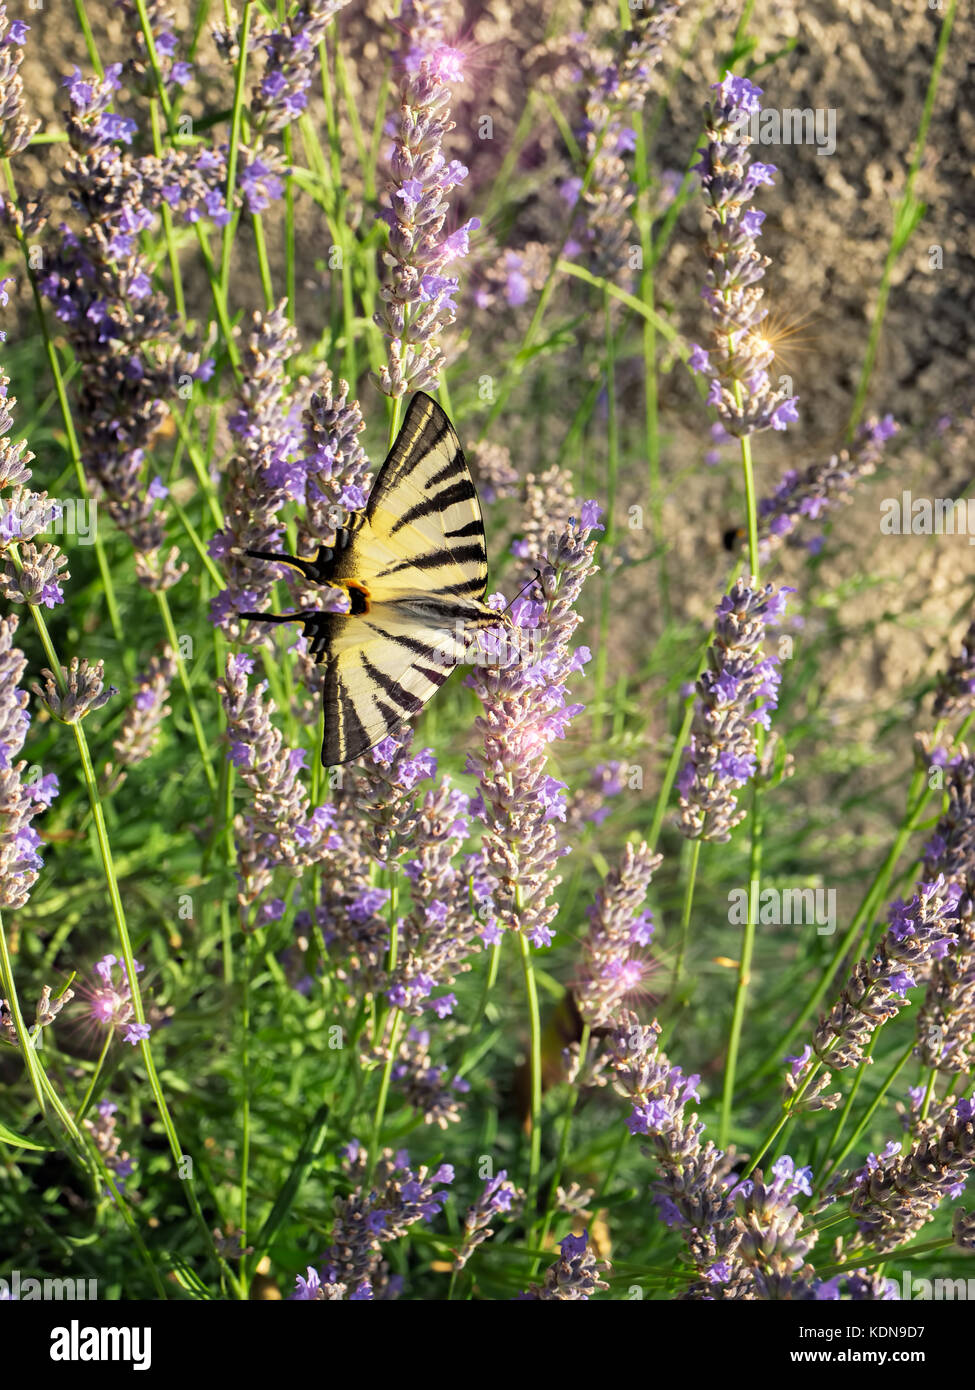 Swallowtail butterfly is collecting nectar on Lavender flowers. Stock Photo